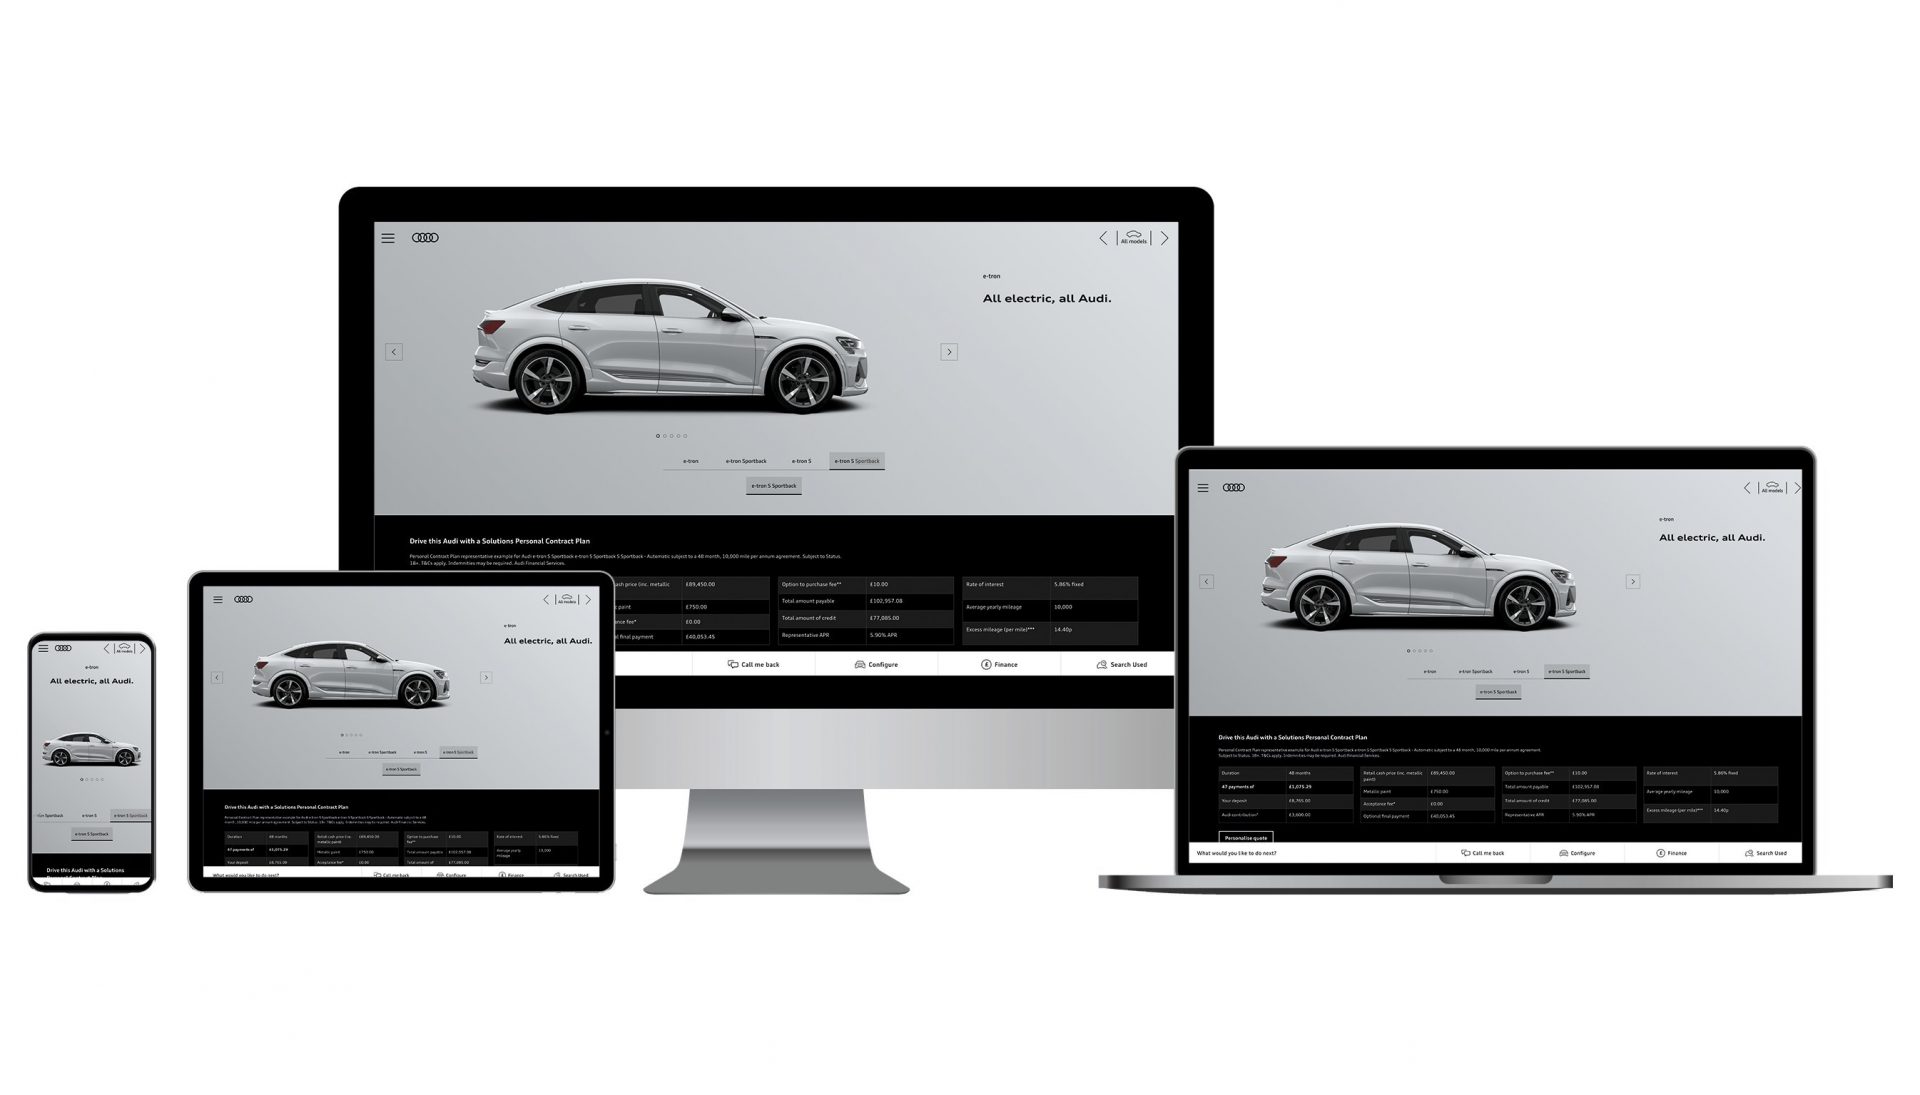 IBM and Audi UK collaborated to redesign Audi's website to deliver a more engaging digital customer experience.